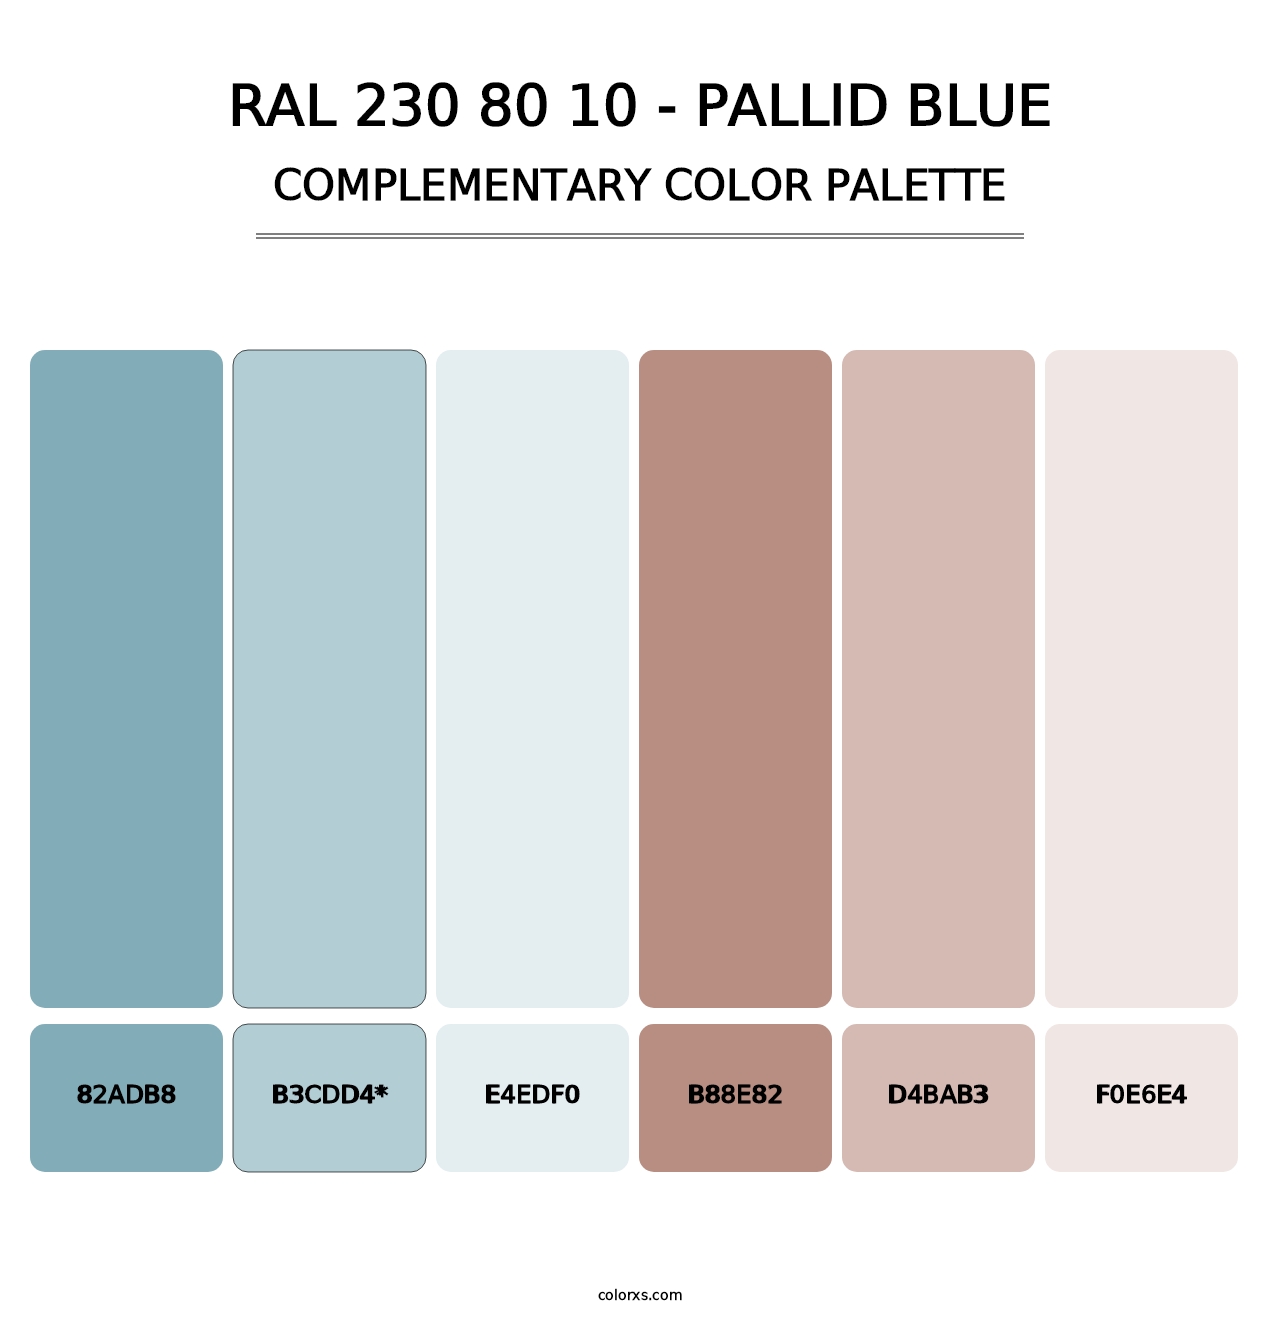 RAL 230 80 10 - Pallid Blue - Complementary Color Palette